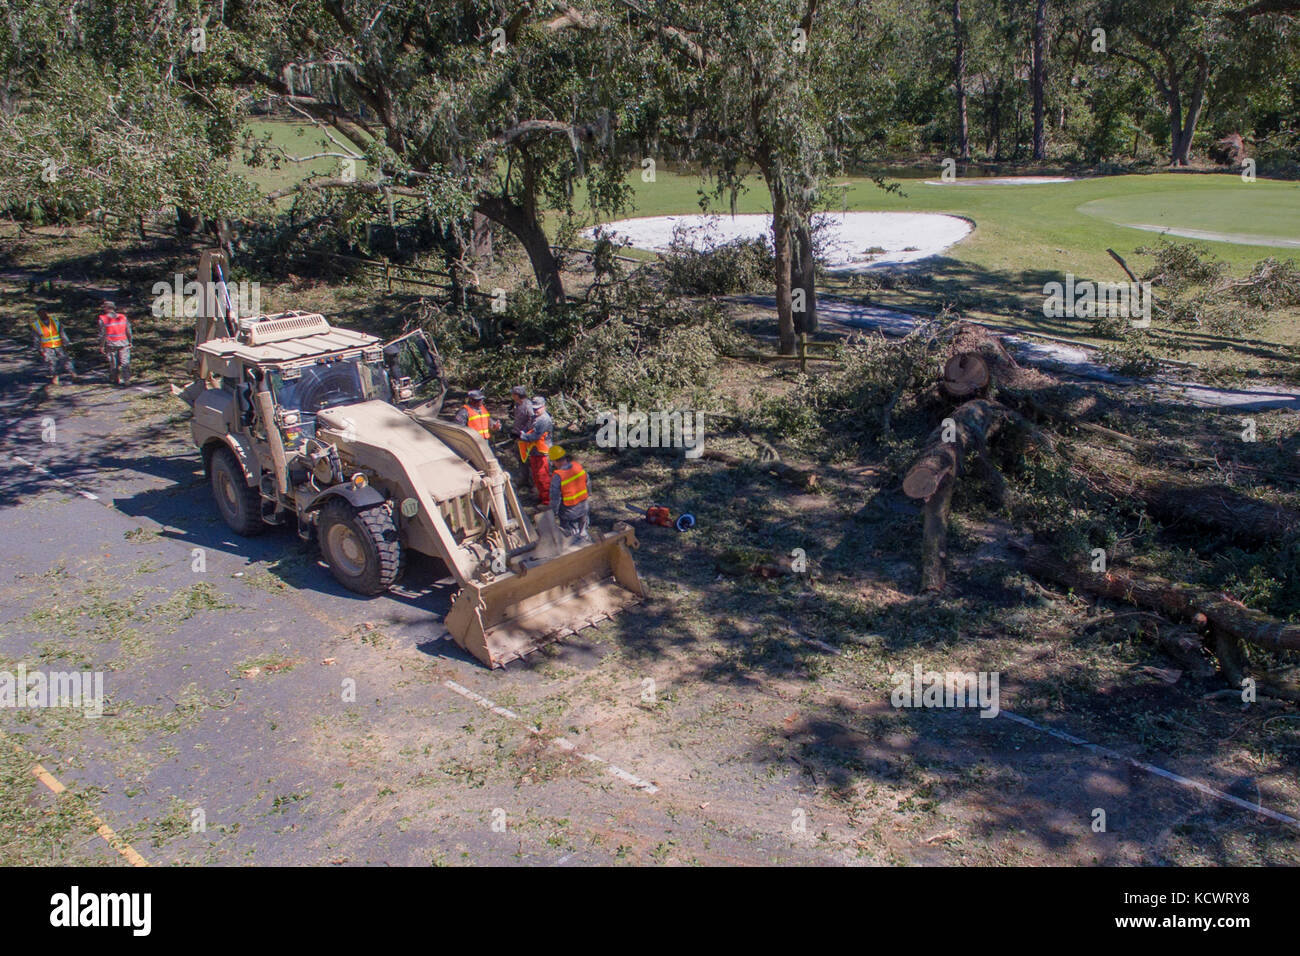 oldiers with 1263rd Forward Support Company and 125th Engineers for the South Carolina Army National Guard, work to remove debris and clear the roadways in Hilton Head Island, South Carolina, Oct. 9, 2016. Approximately 2,800 S.C. National Guard Soldiers and Airmen have been activated since Oct. 4, 2016, to support state and county emergency management agencies and local first responders after Governor Nikki Haley declared a State of Emergency. (U.S. Army National Guard photo by Sgt. Brian Calhoun, 108th Public Affairs Detachment) Stock Photo